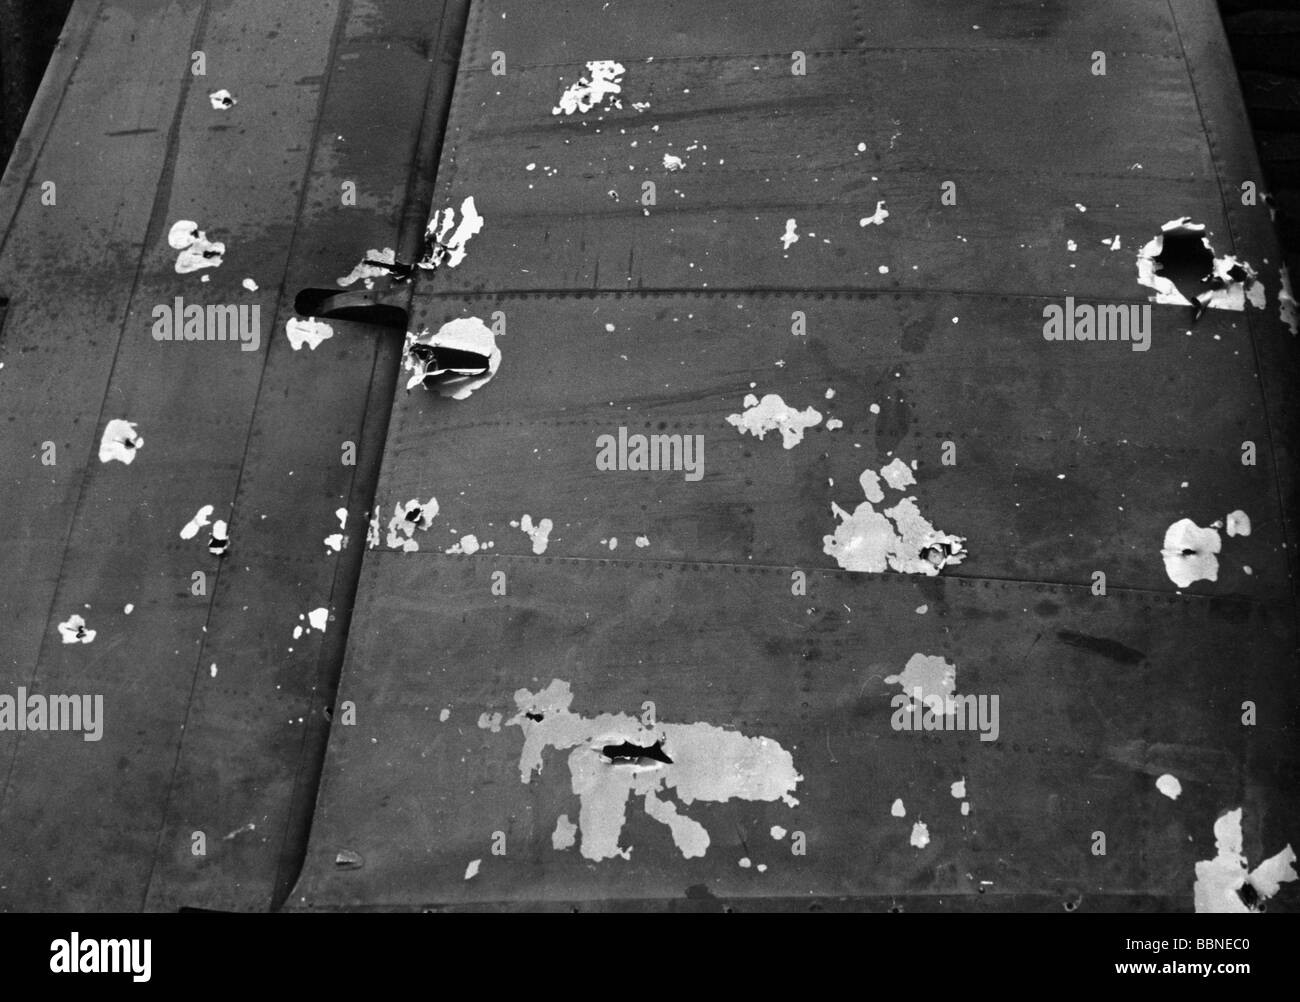 events, Second World War / WWII, aerial warfare, aircraft, crashed / damaged, German bomber back from a mission against England, autumn 1940, Stock Photo